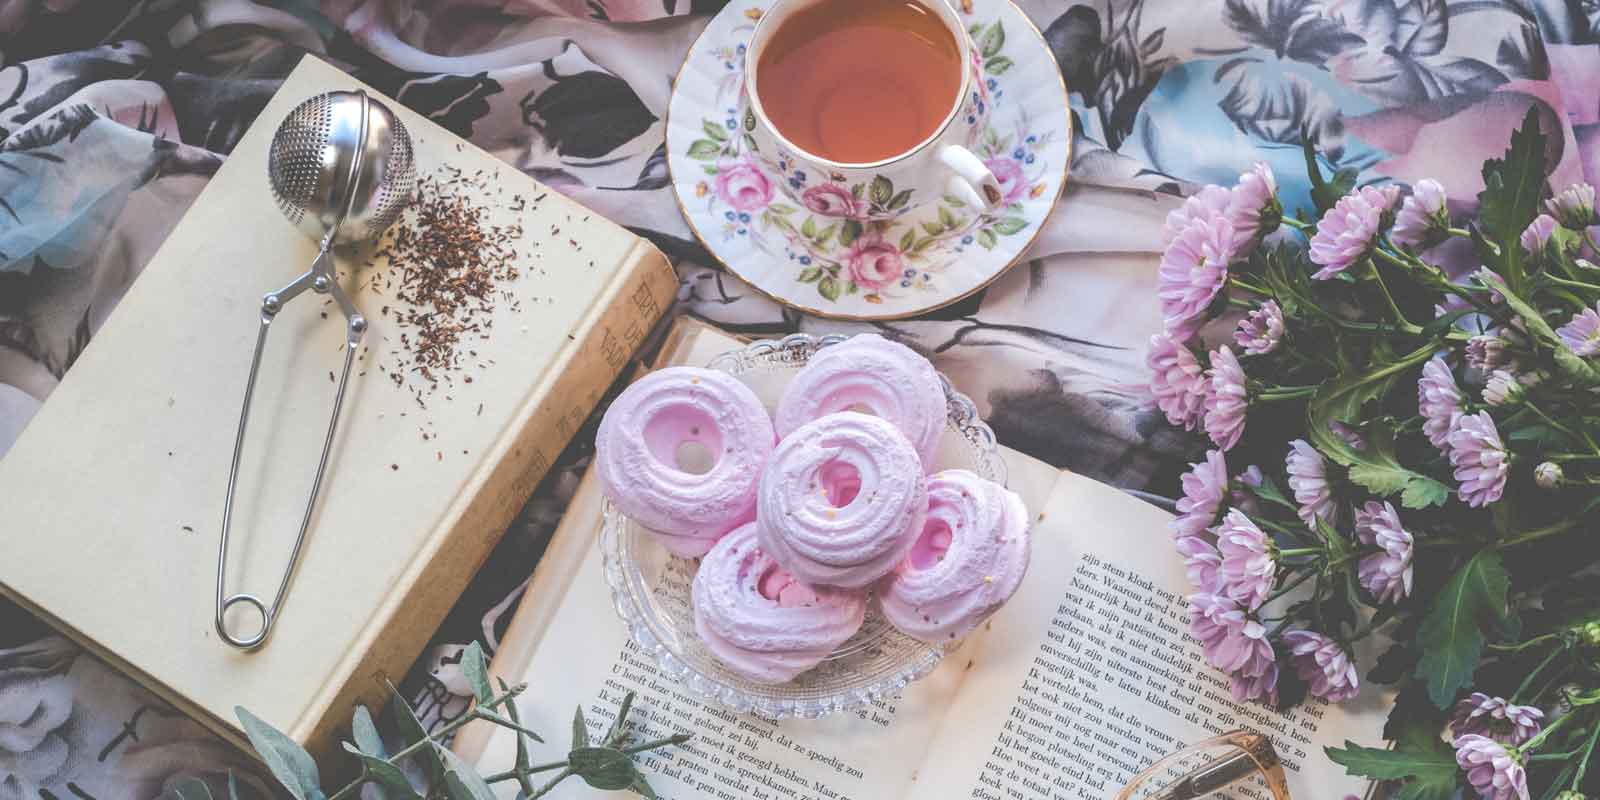 Flatlay photo of old books with a bunch of lavender flowers, pink meringue cookies, and a cup of tea.